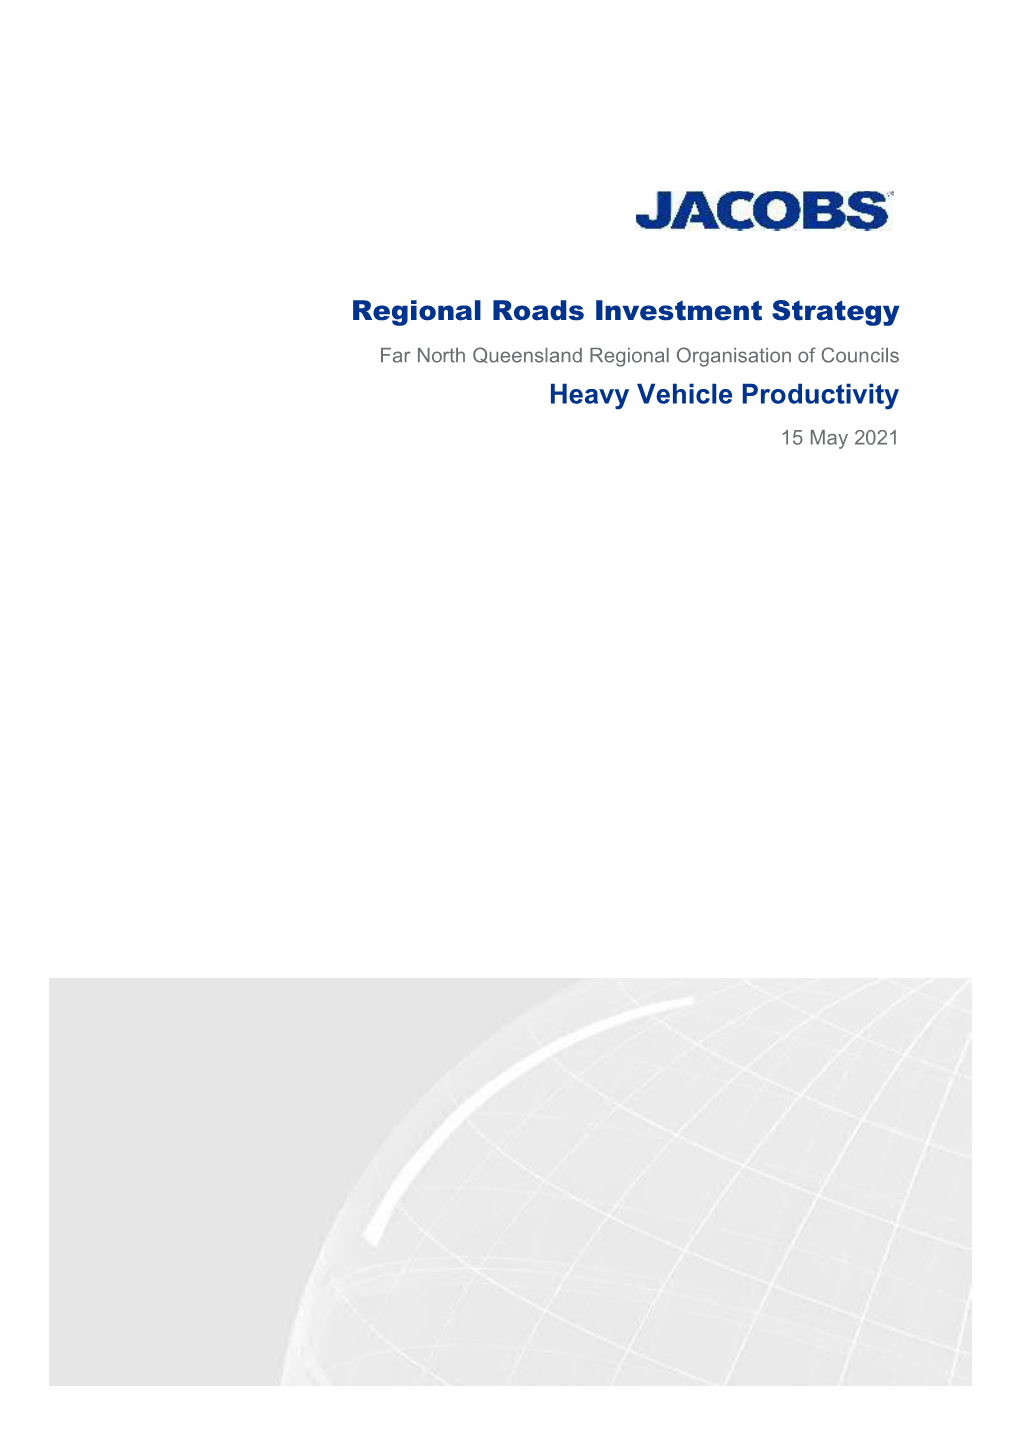 Regional Roads Investment Strategy Heavy Vehicle Productivity